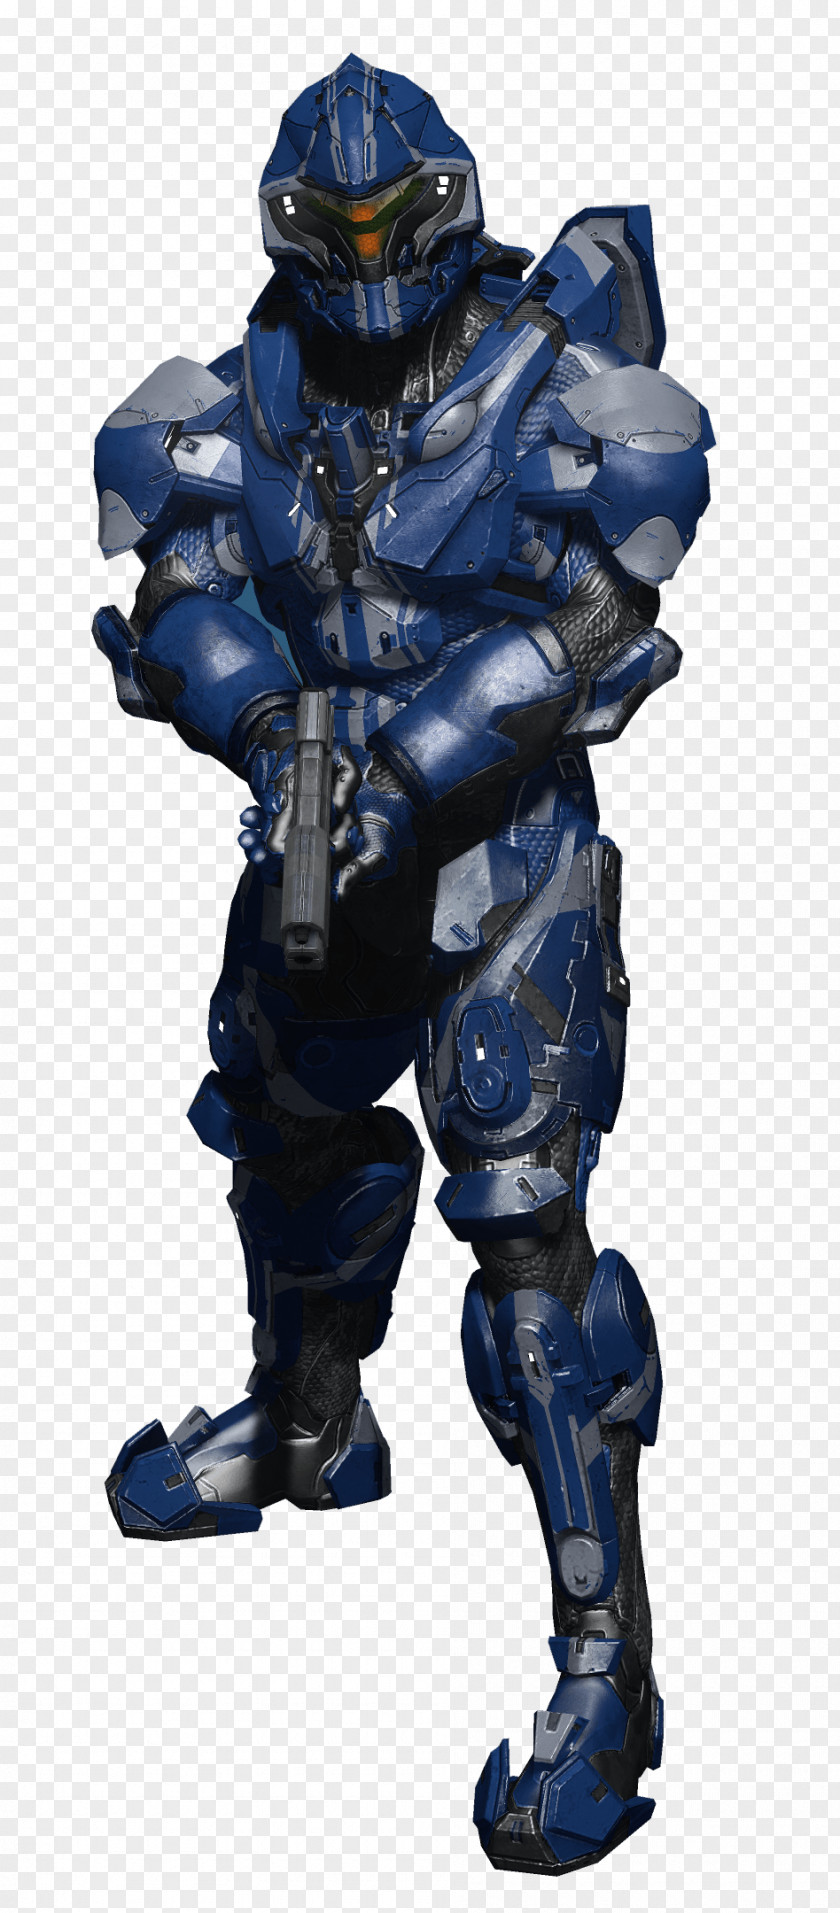 Pathfinder Halo 4 Halo: Reach 5: Guardians Spartan Assault Roleplaying Game PNG